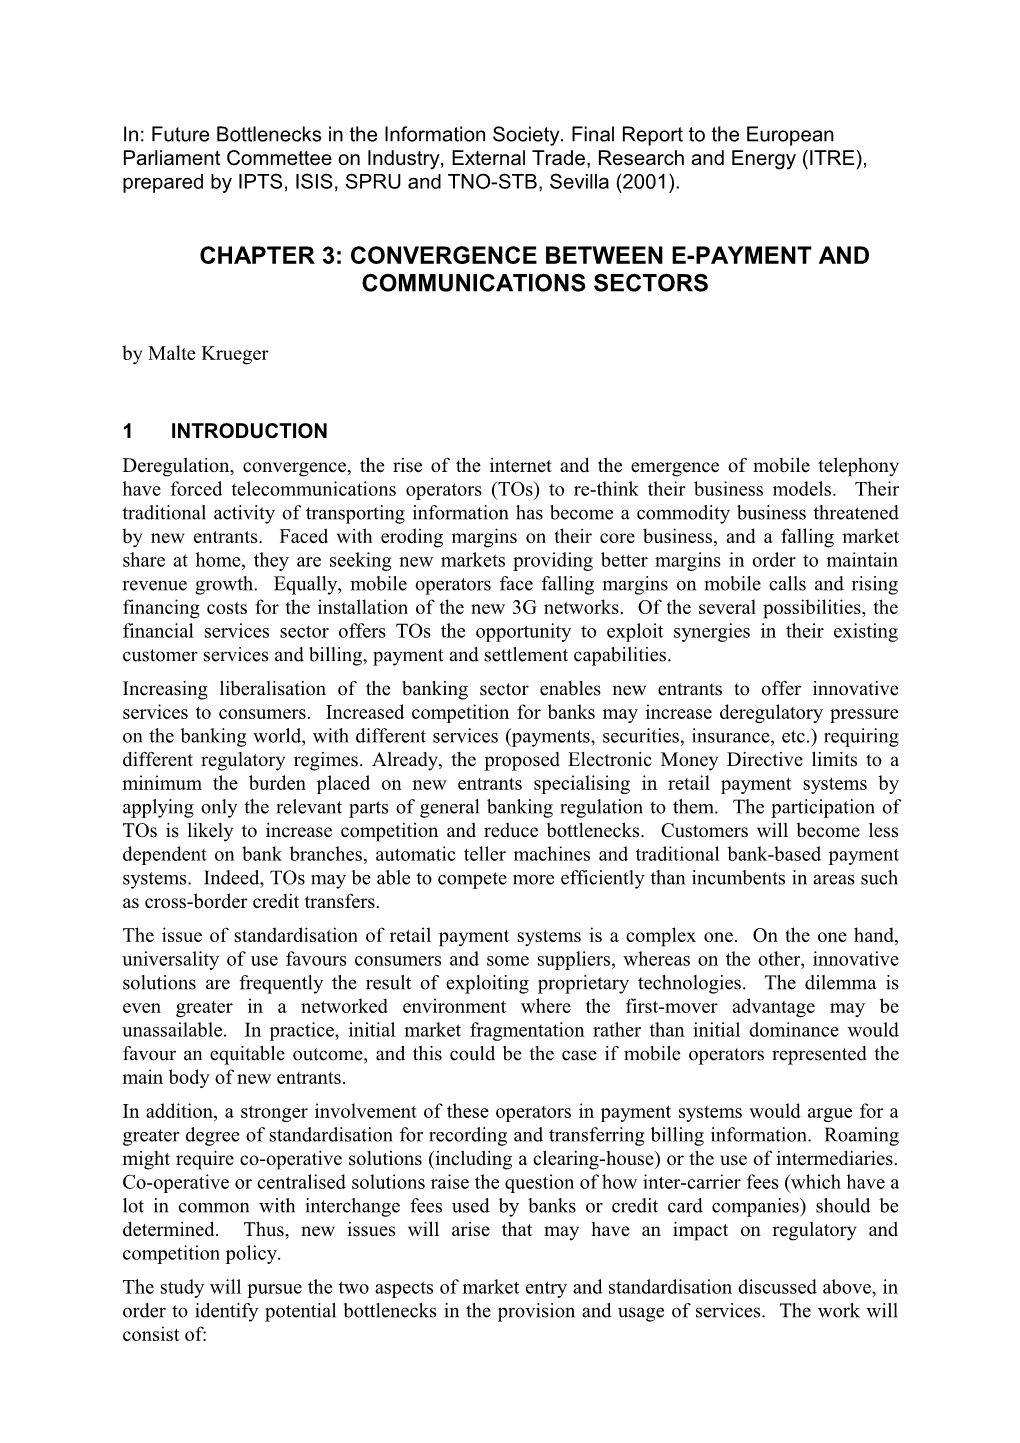 Chapter 3: Convergence Between E-Payment and Communications Sectors